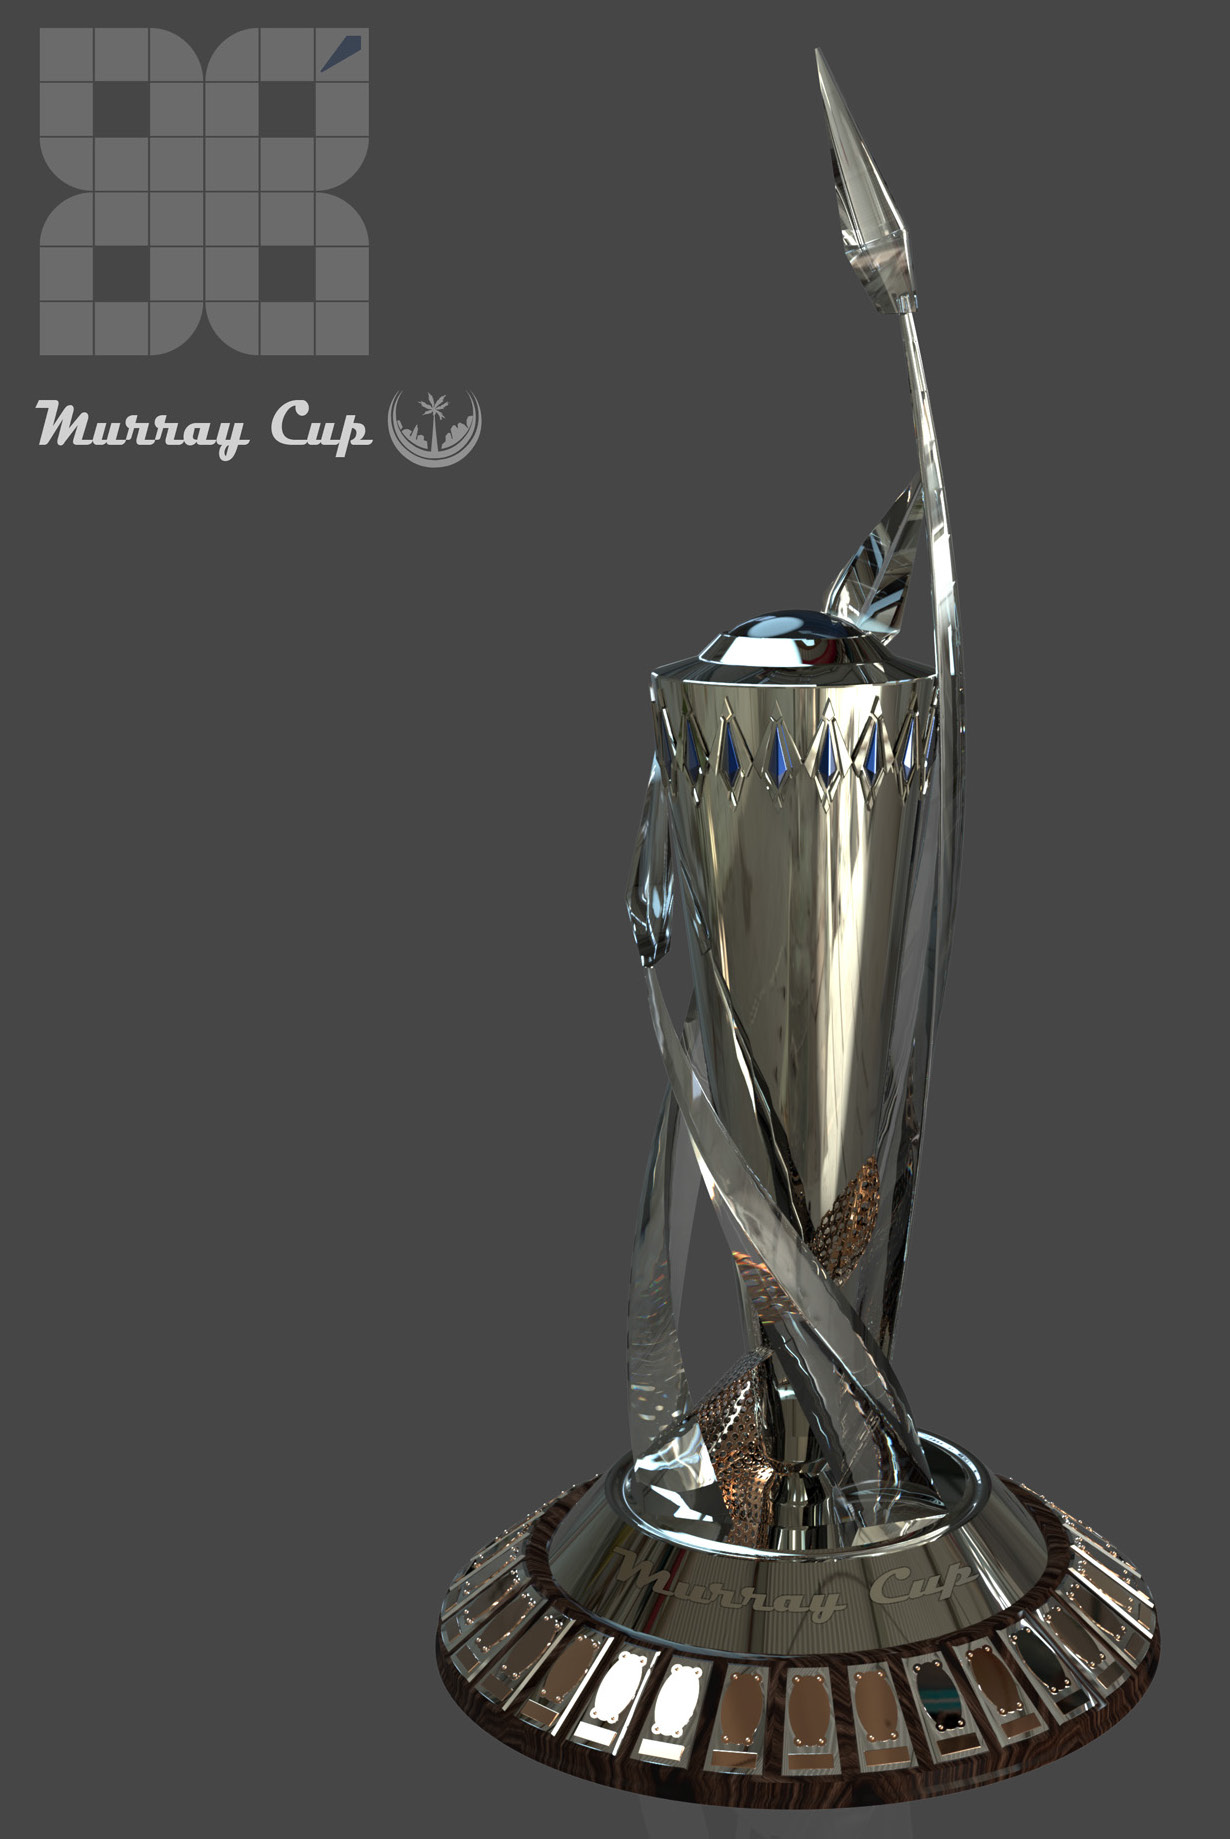 Datei:Murray Cup Trophy.png